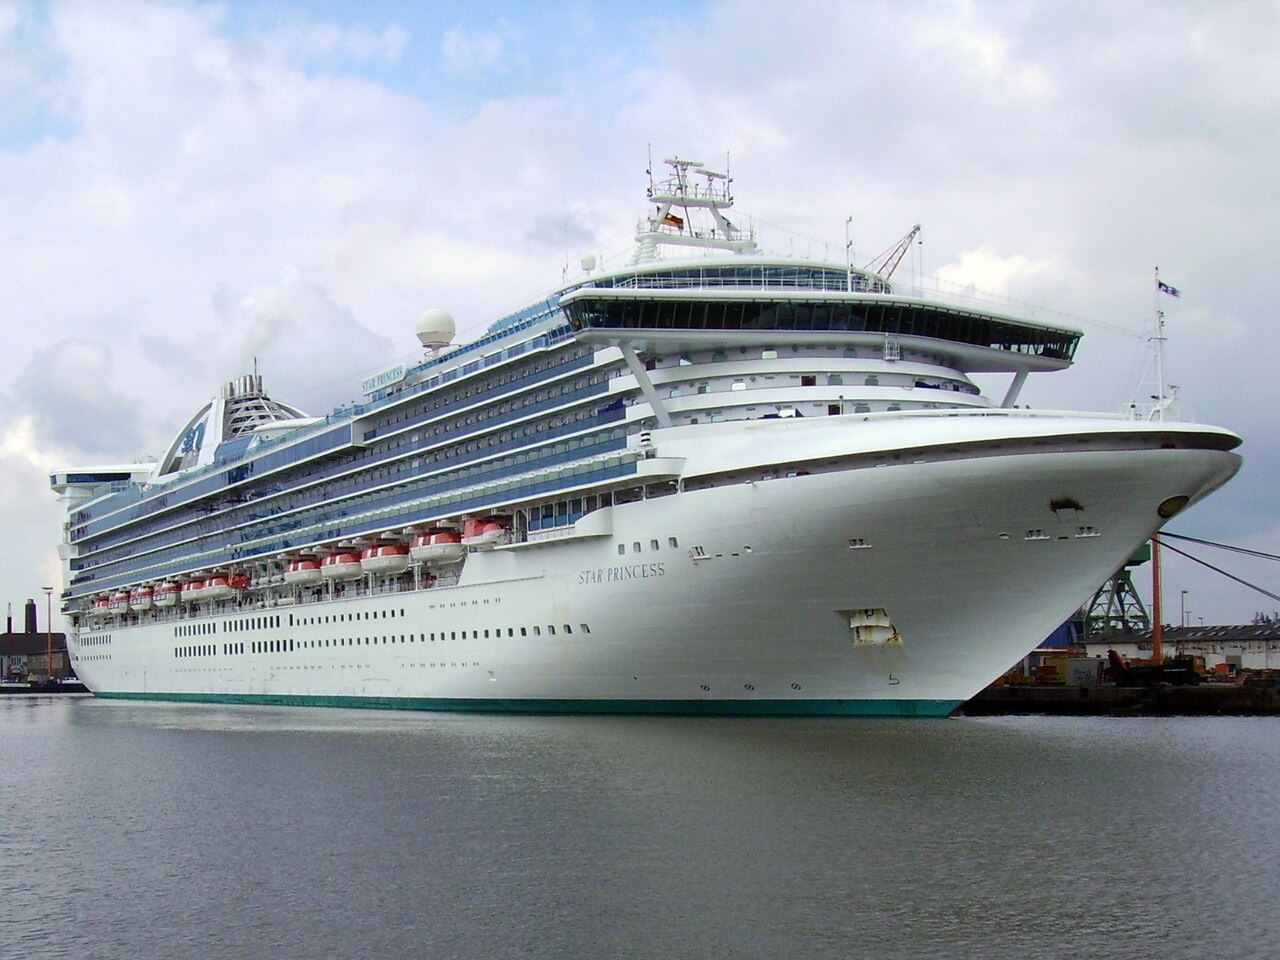 <p>In March of 2006, the Star Princess, a massive cruise ship carrying 3,100 passengers was sailing from Fort Lauderdale toward Jamaica when a fire broke out on one of its decks at 3 a.m.</p>